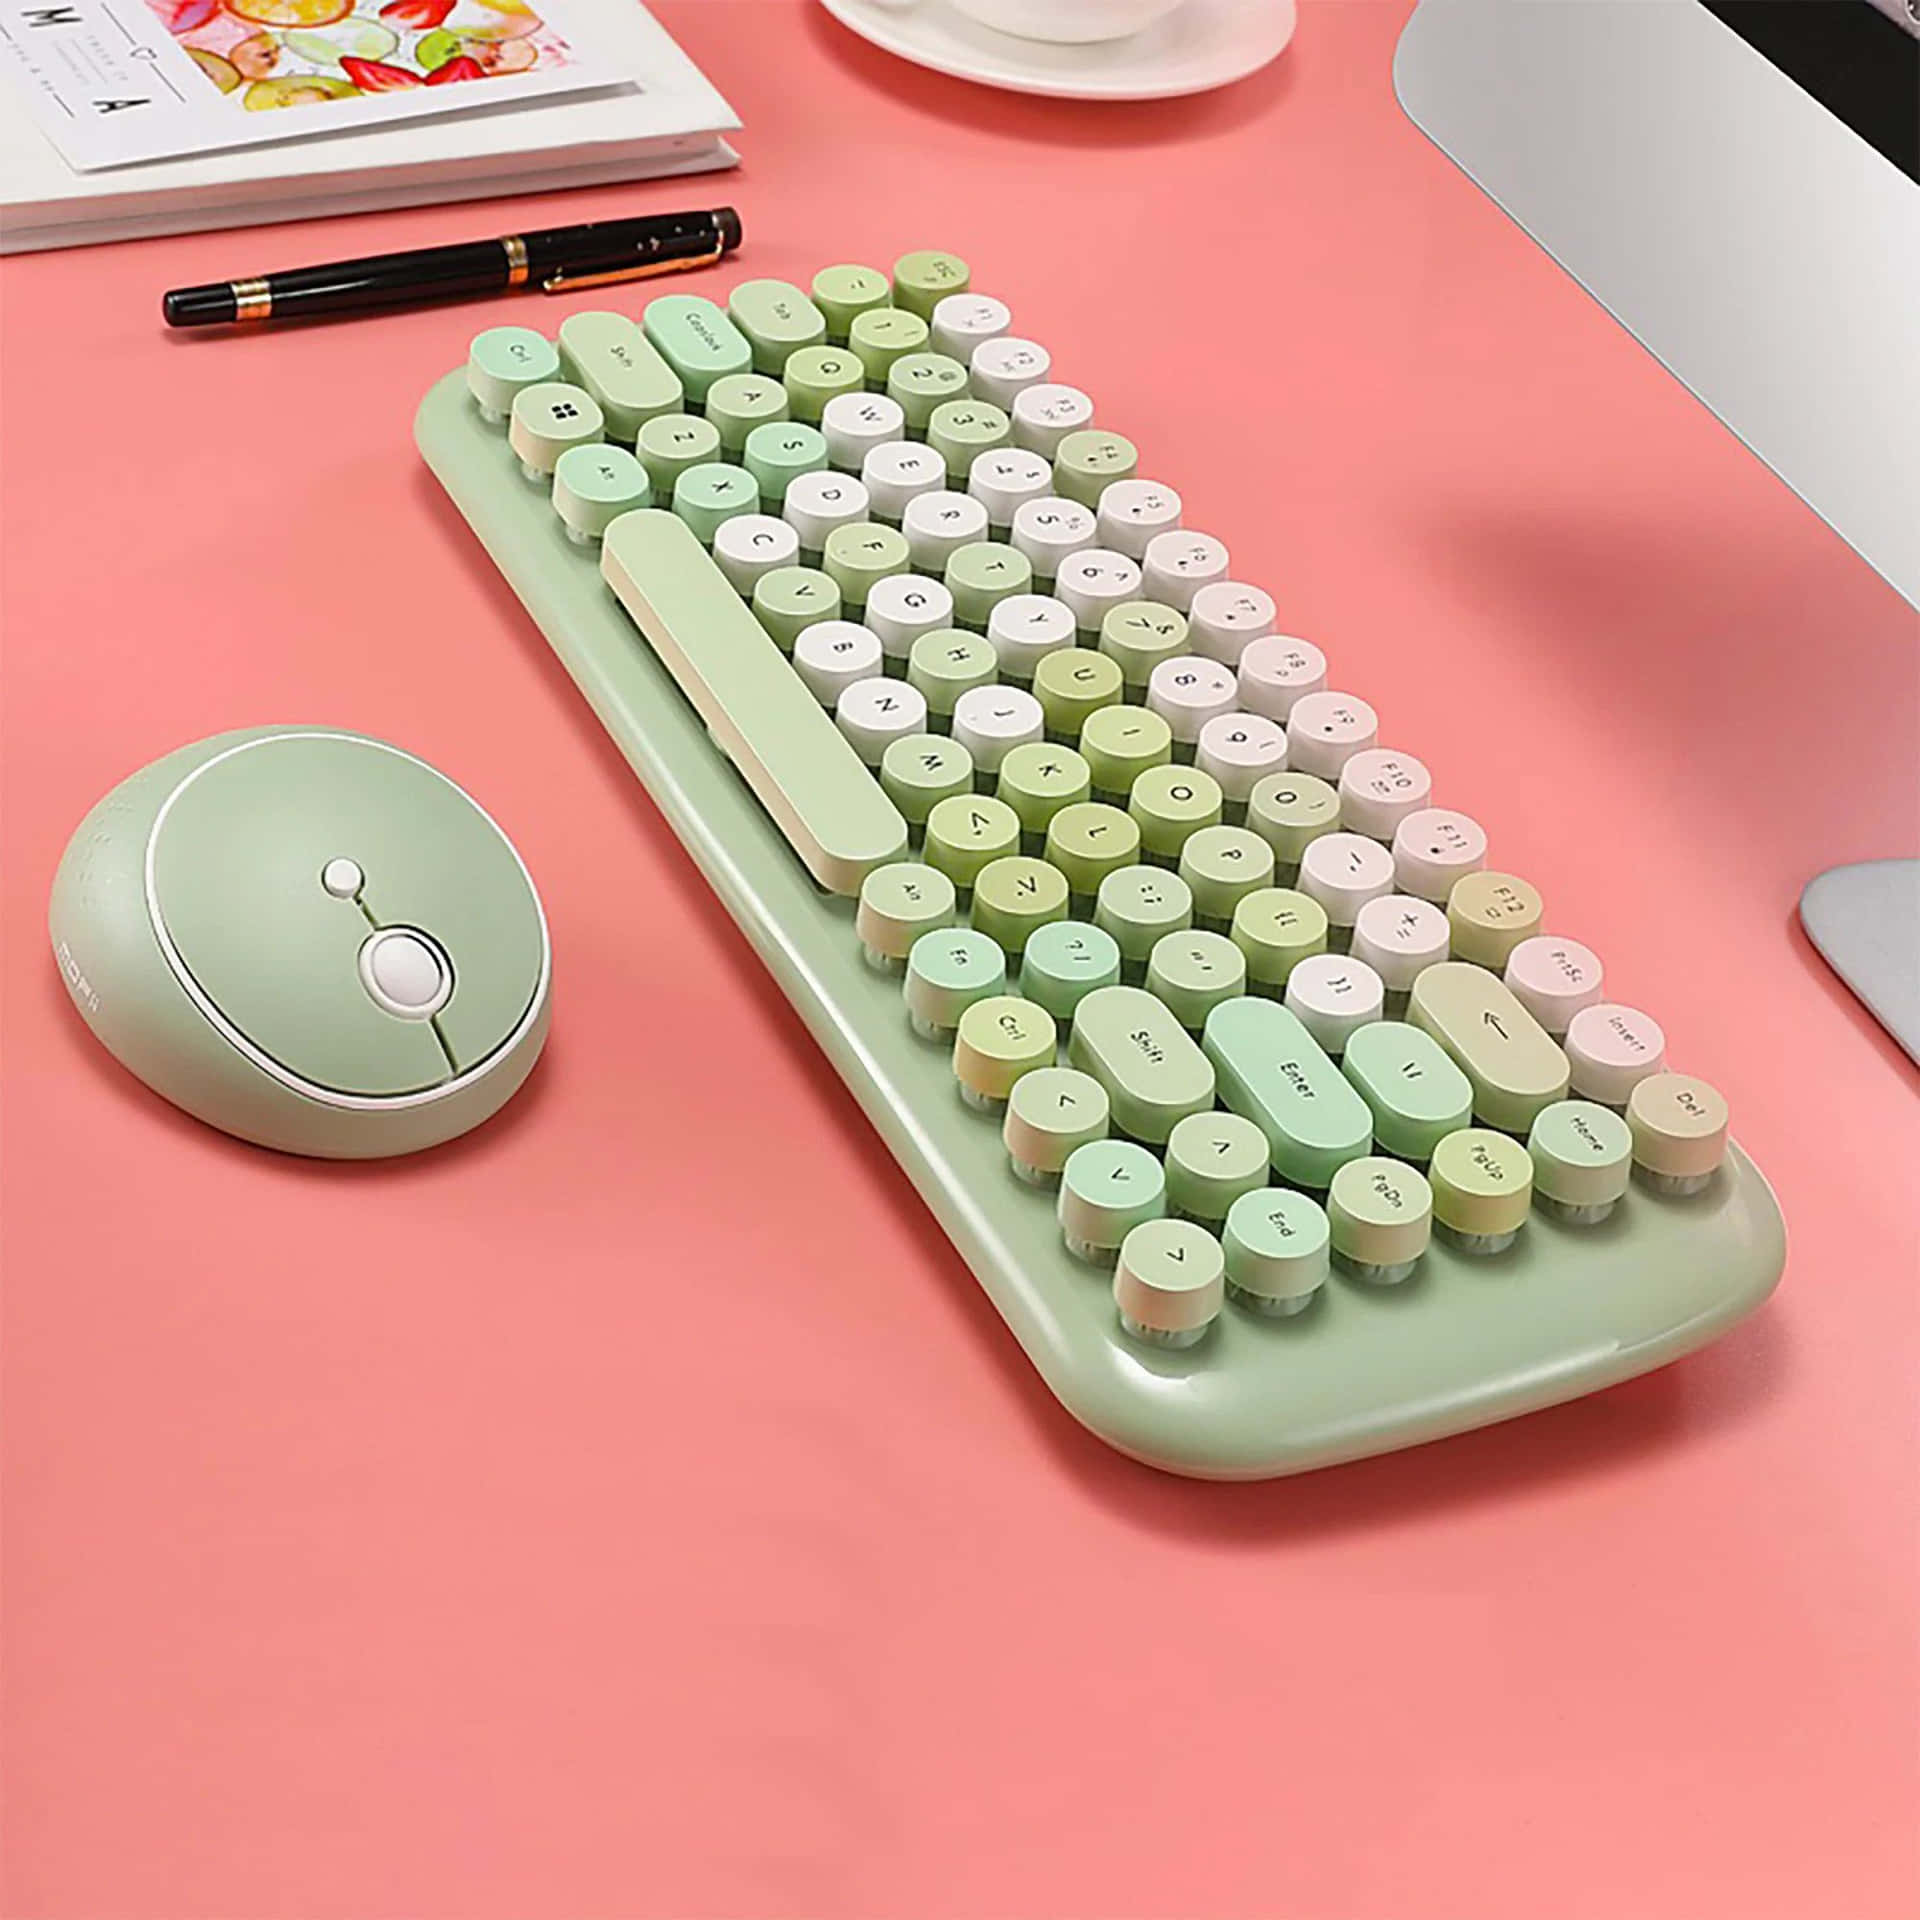 A Green Keyboard And Mouse On A Pink Desk